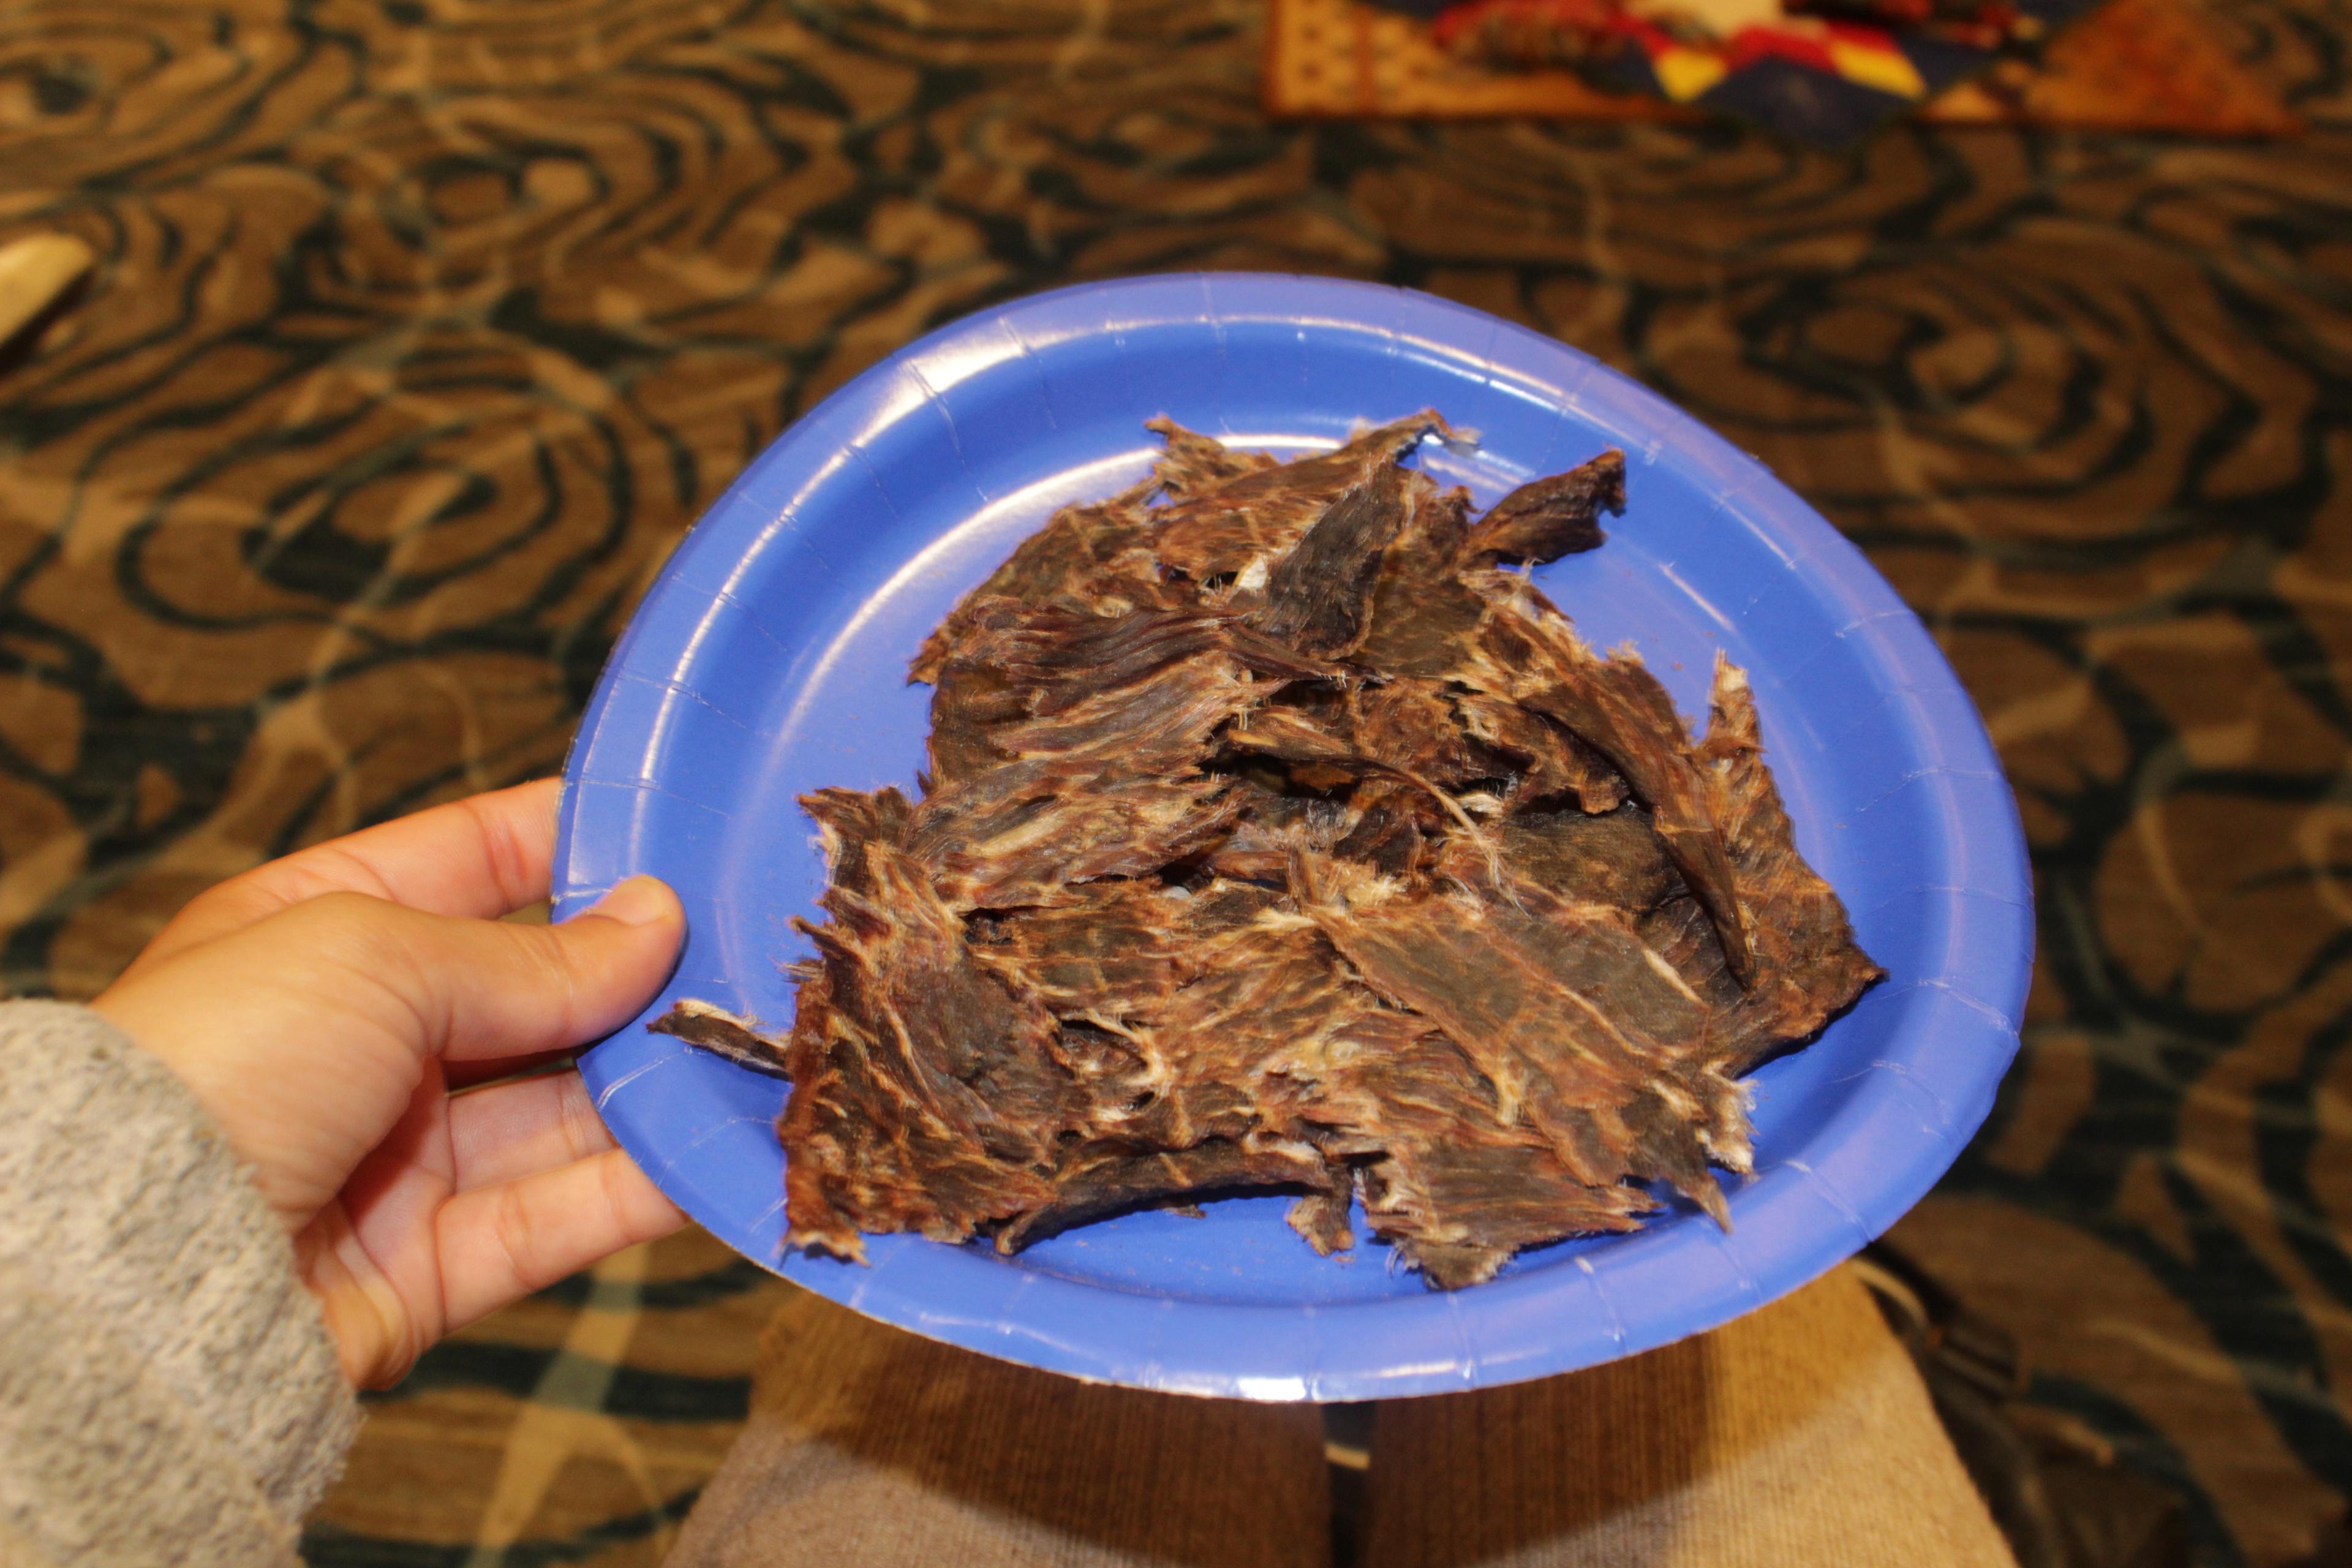 Dried moose meat, yummy